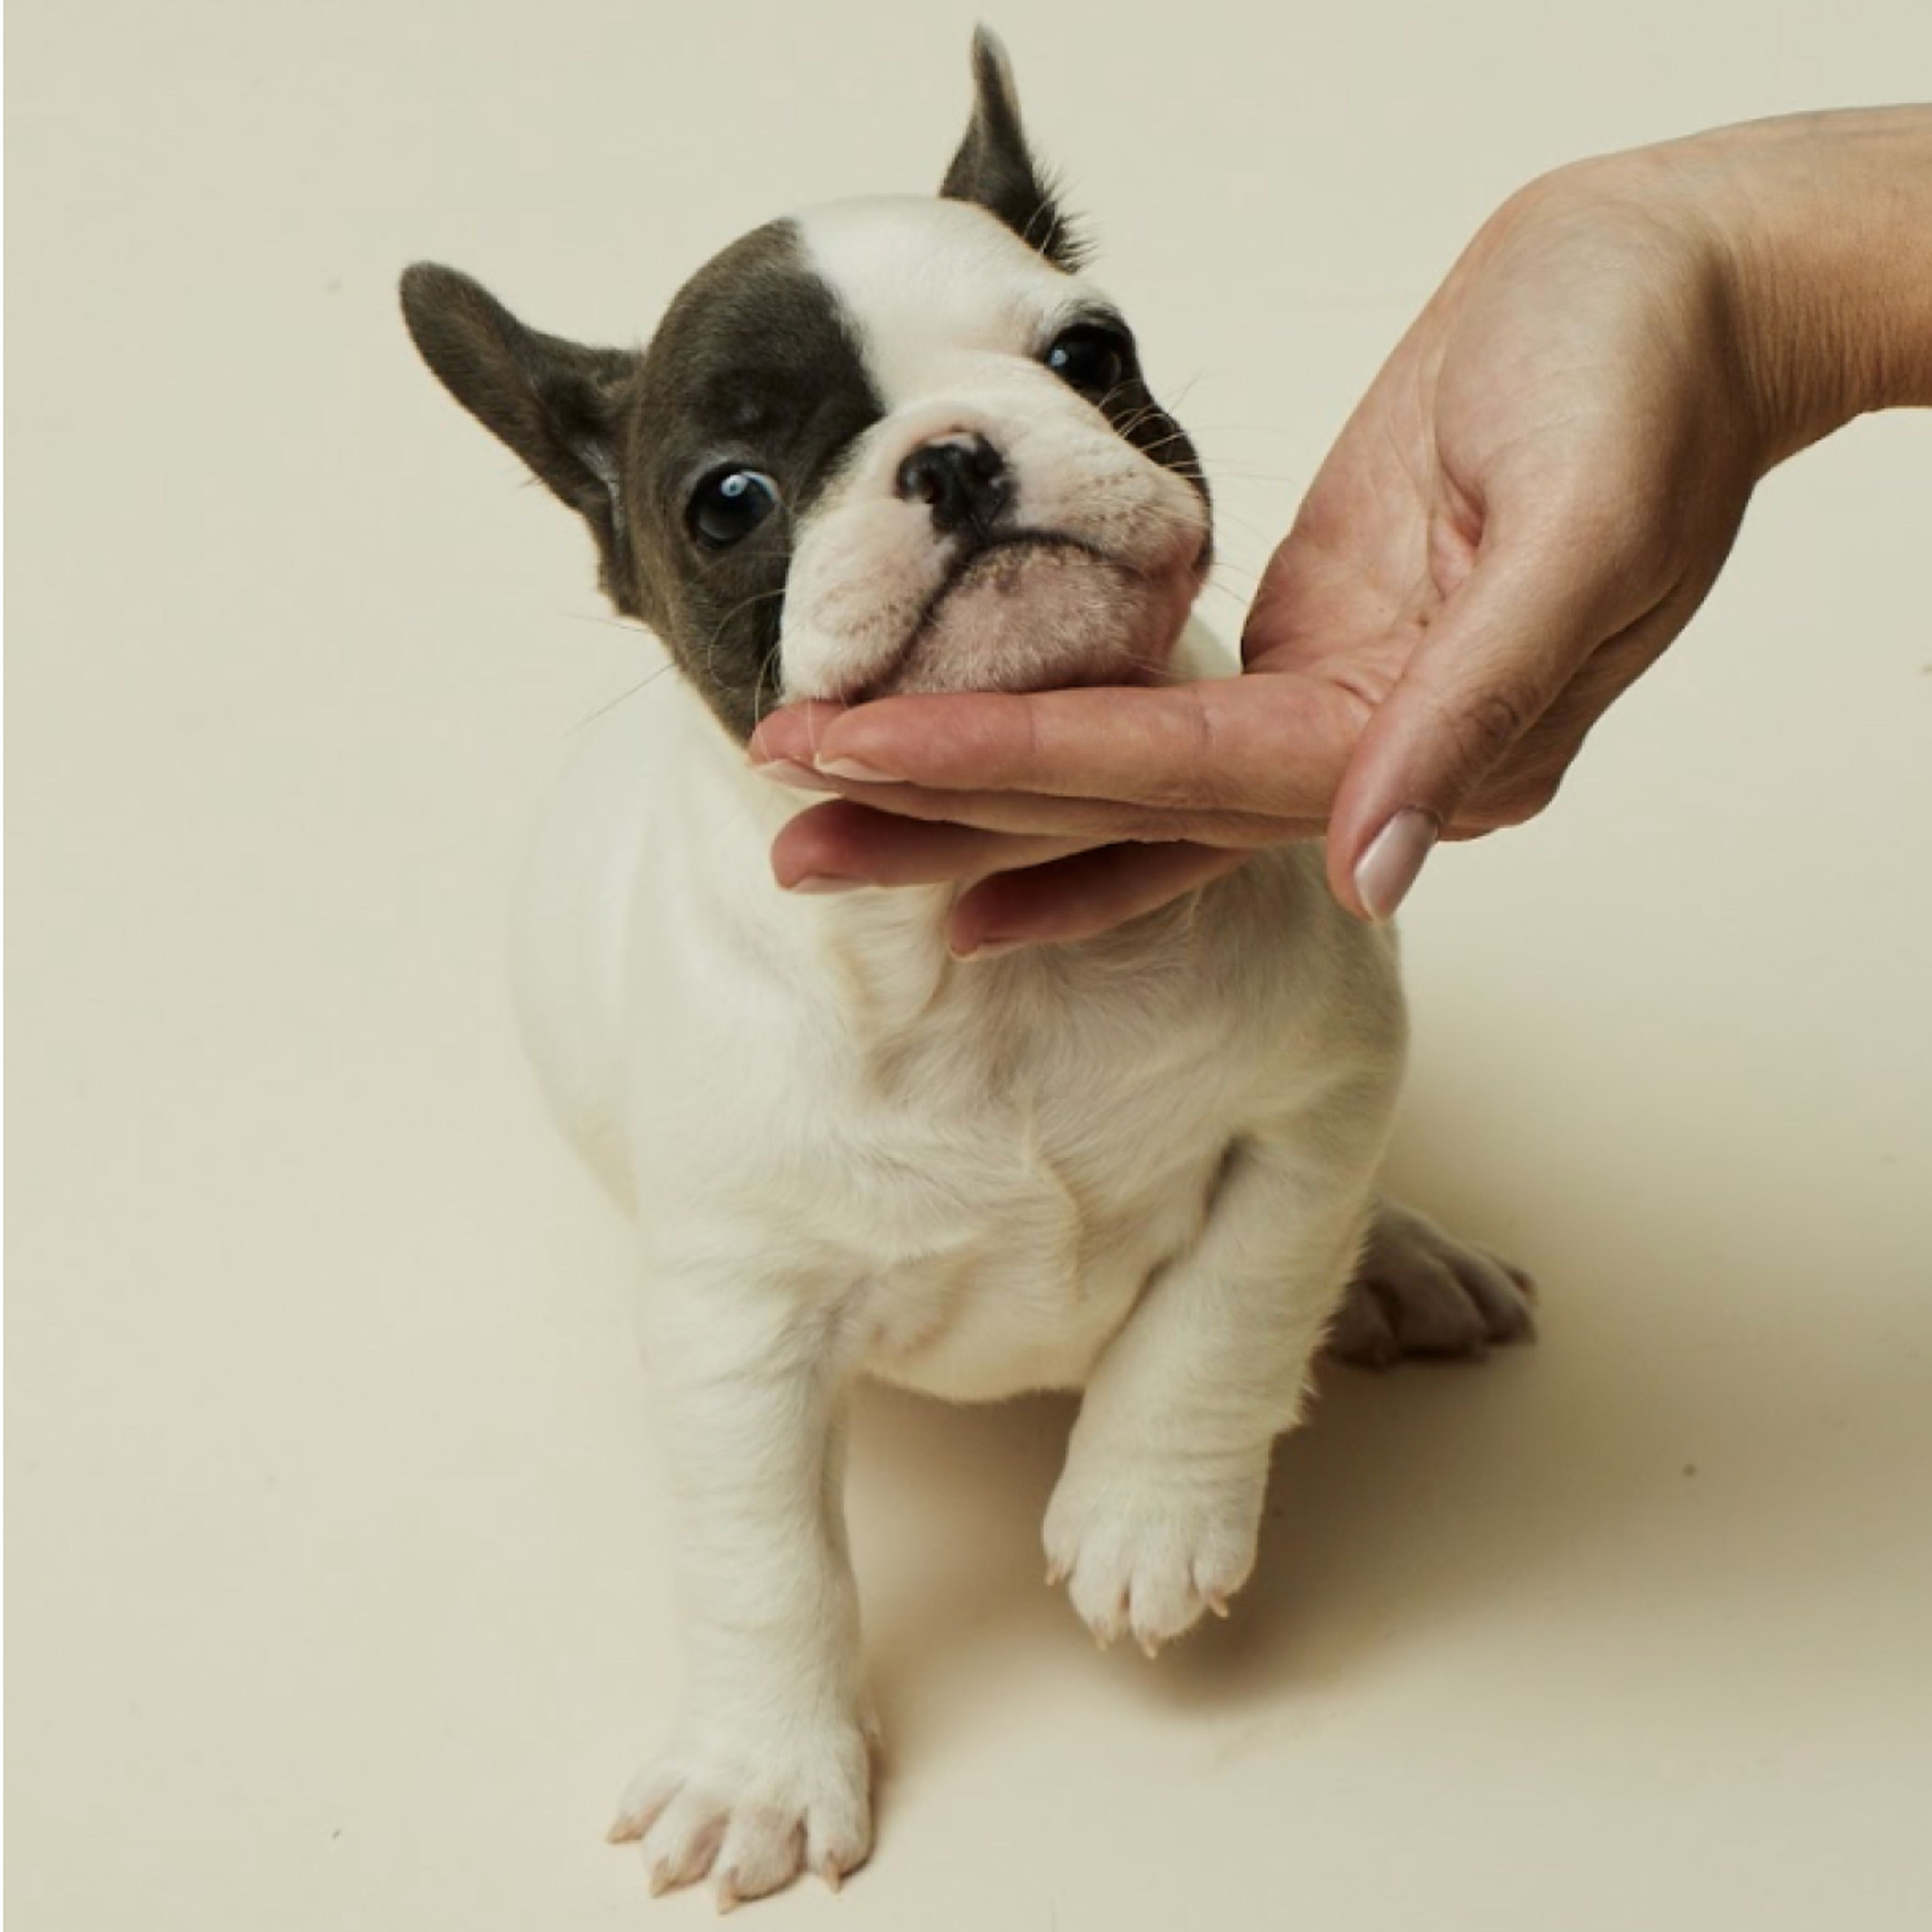 Small pup with a hand under its chin